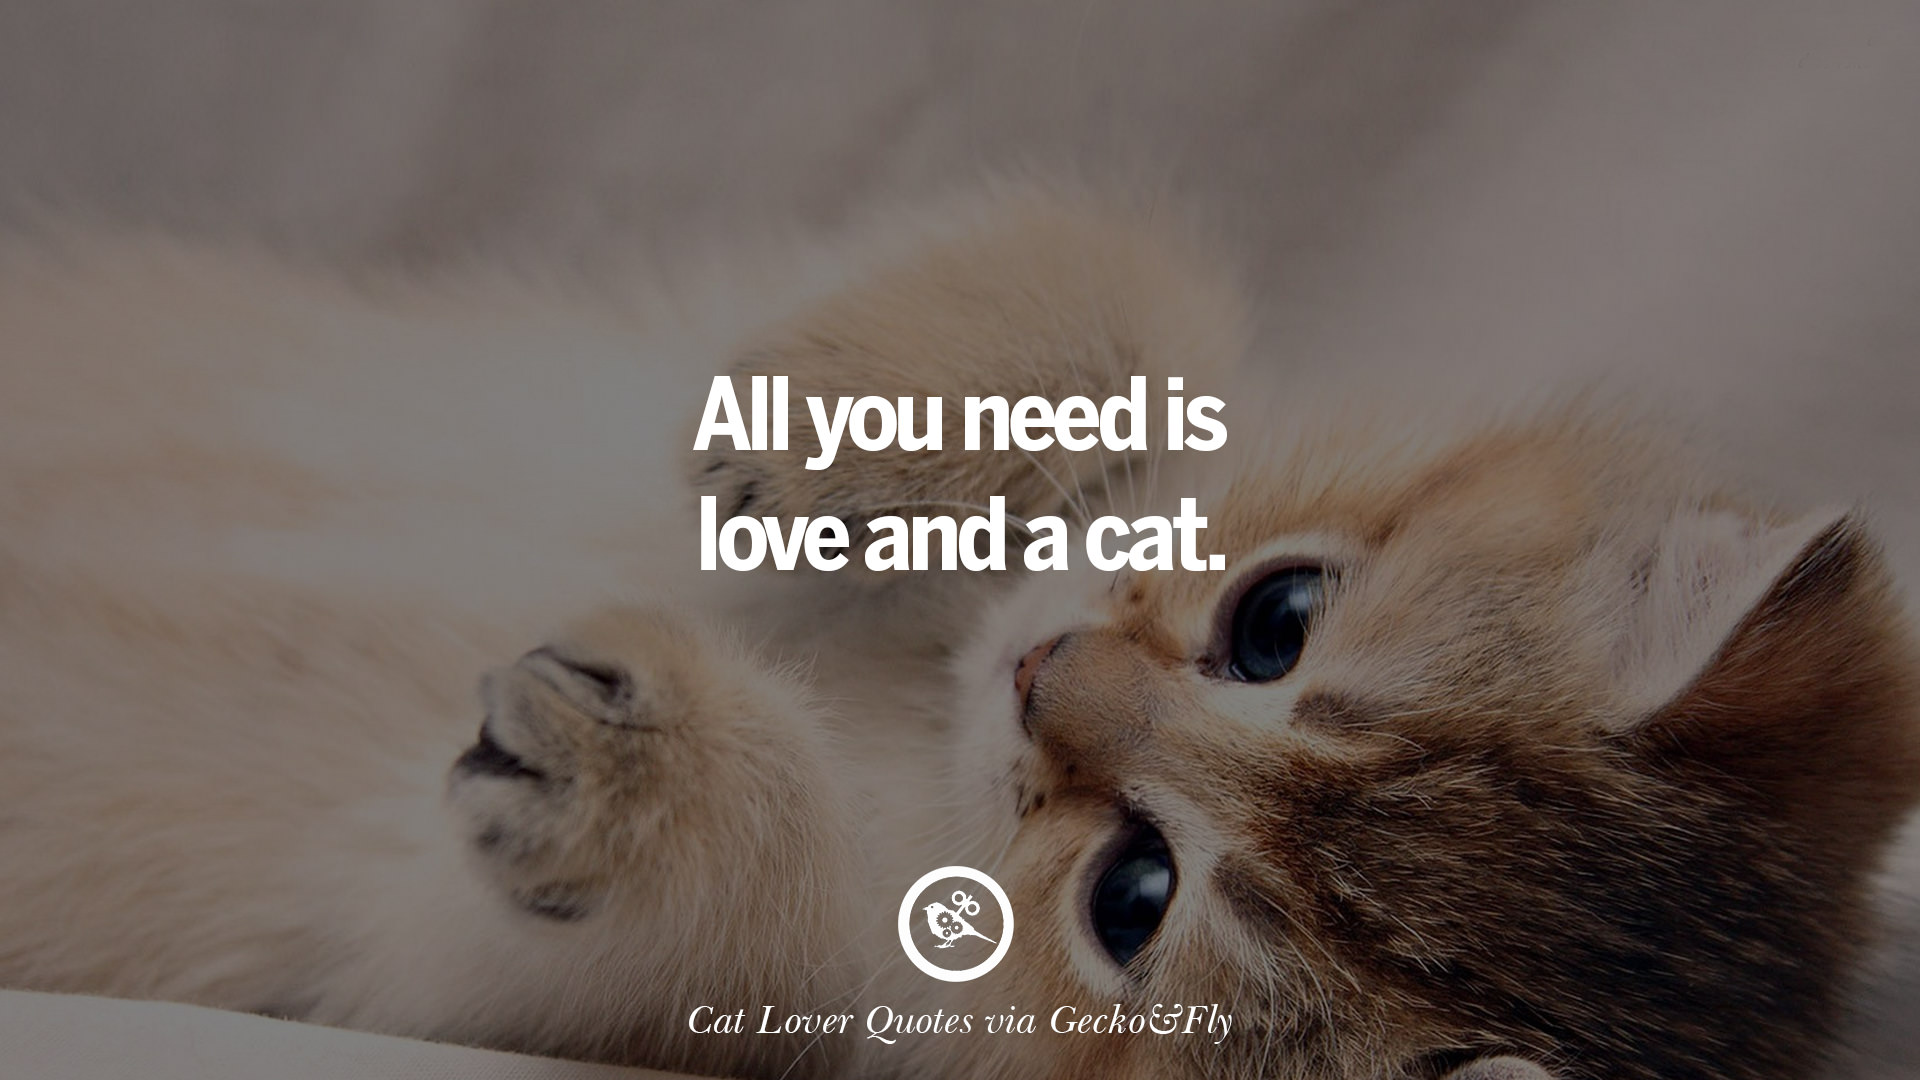 New Cat Love Quotes Sayings | Love quotes collection within HD images